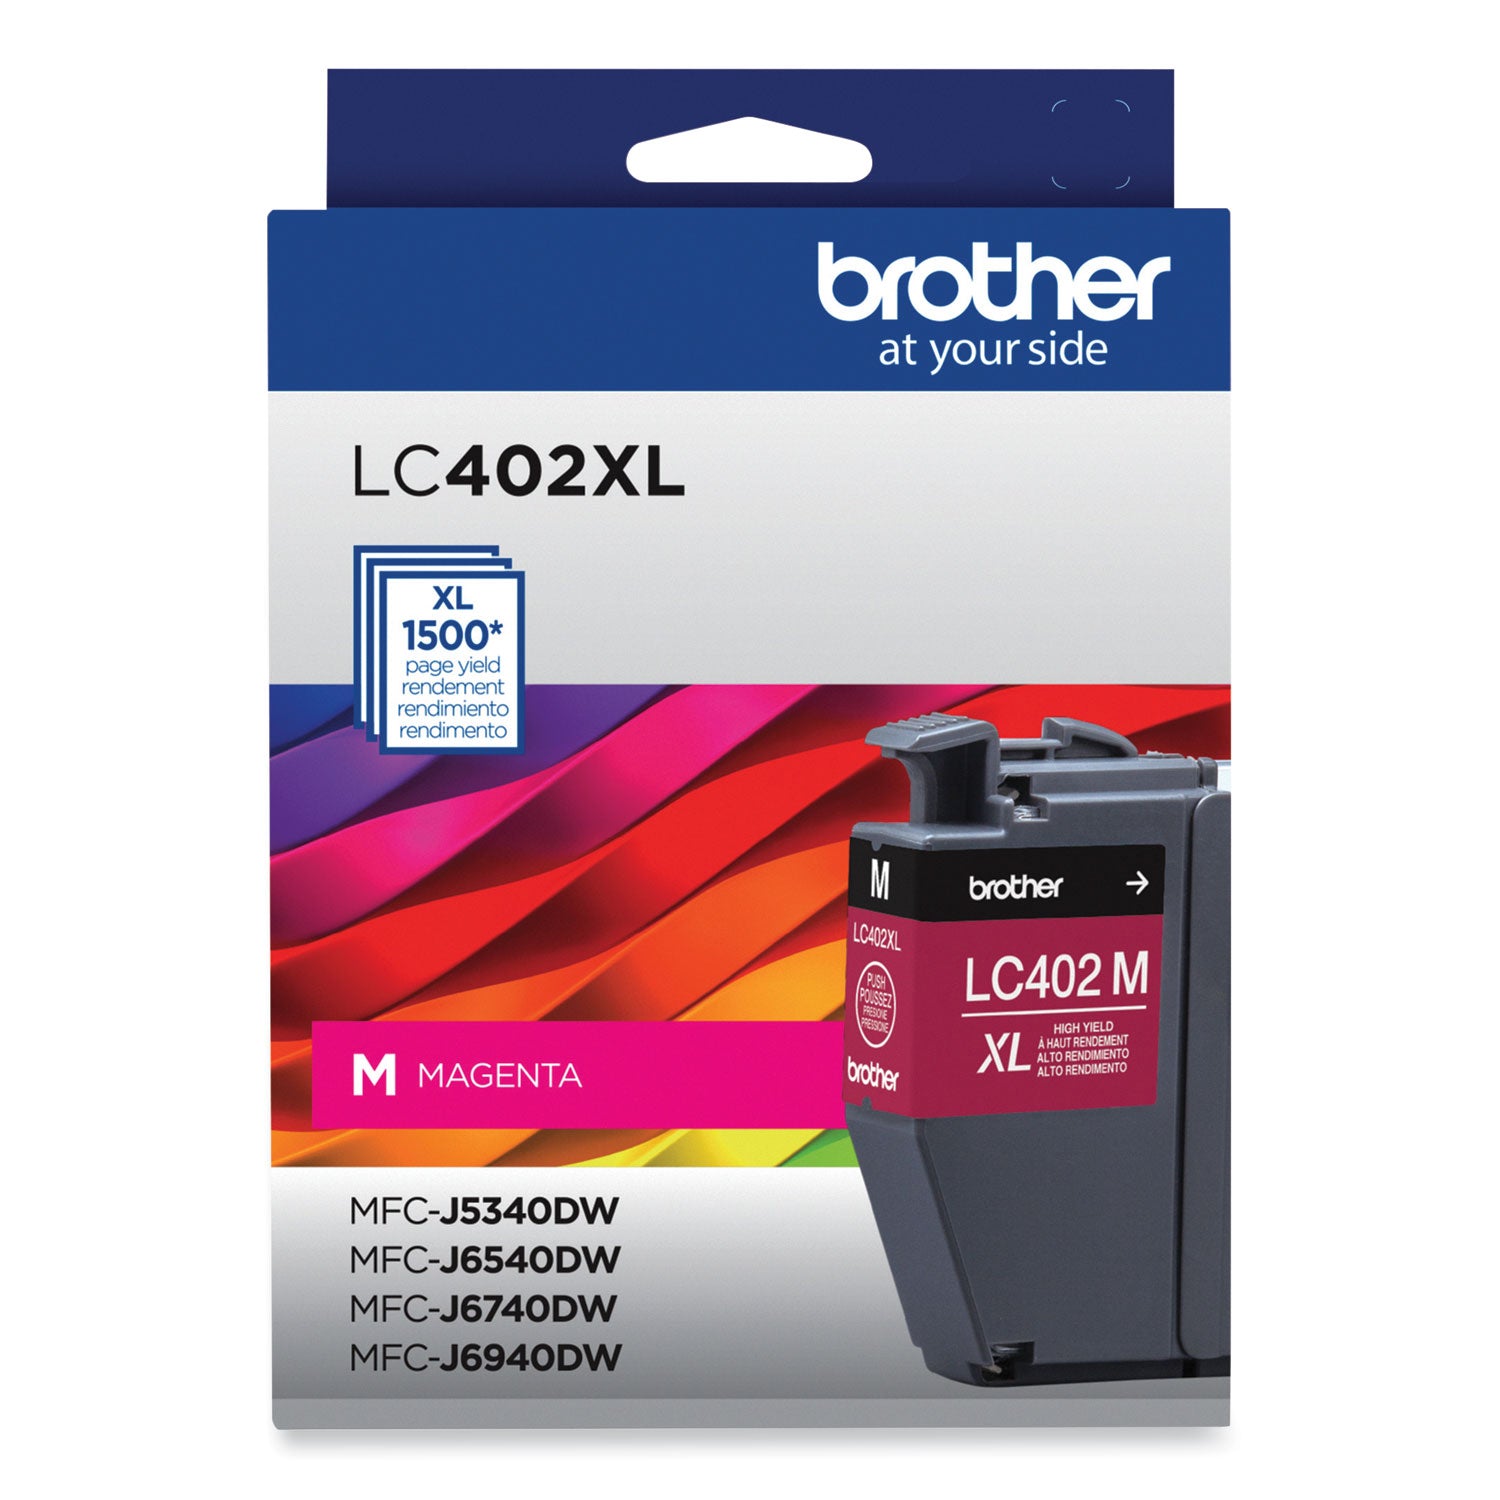 lc402xlms-high-yield-ink-1500-page-yield-magenta_brtlc402xlms - 1